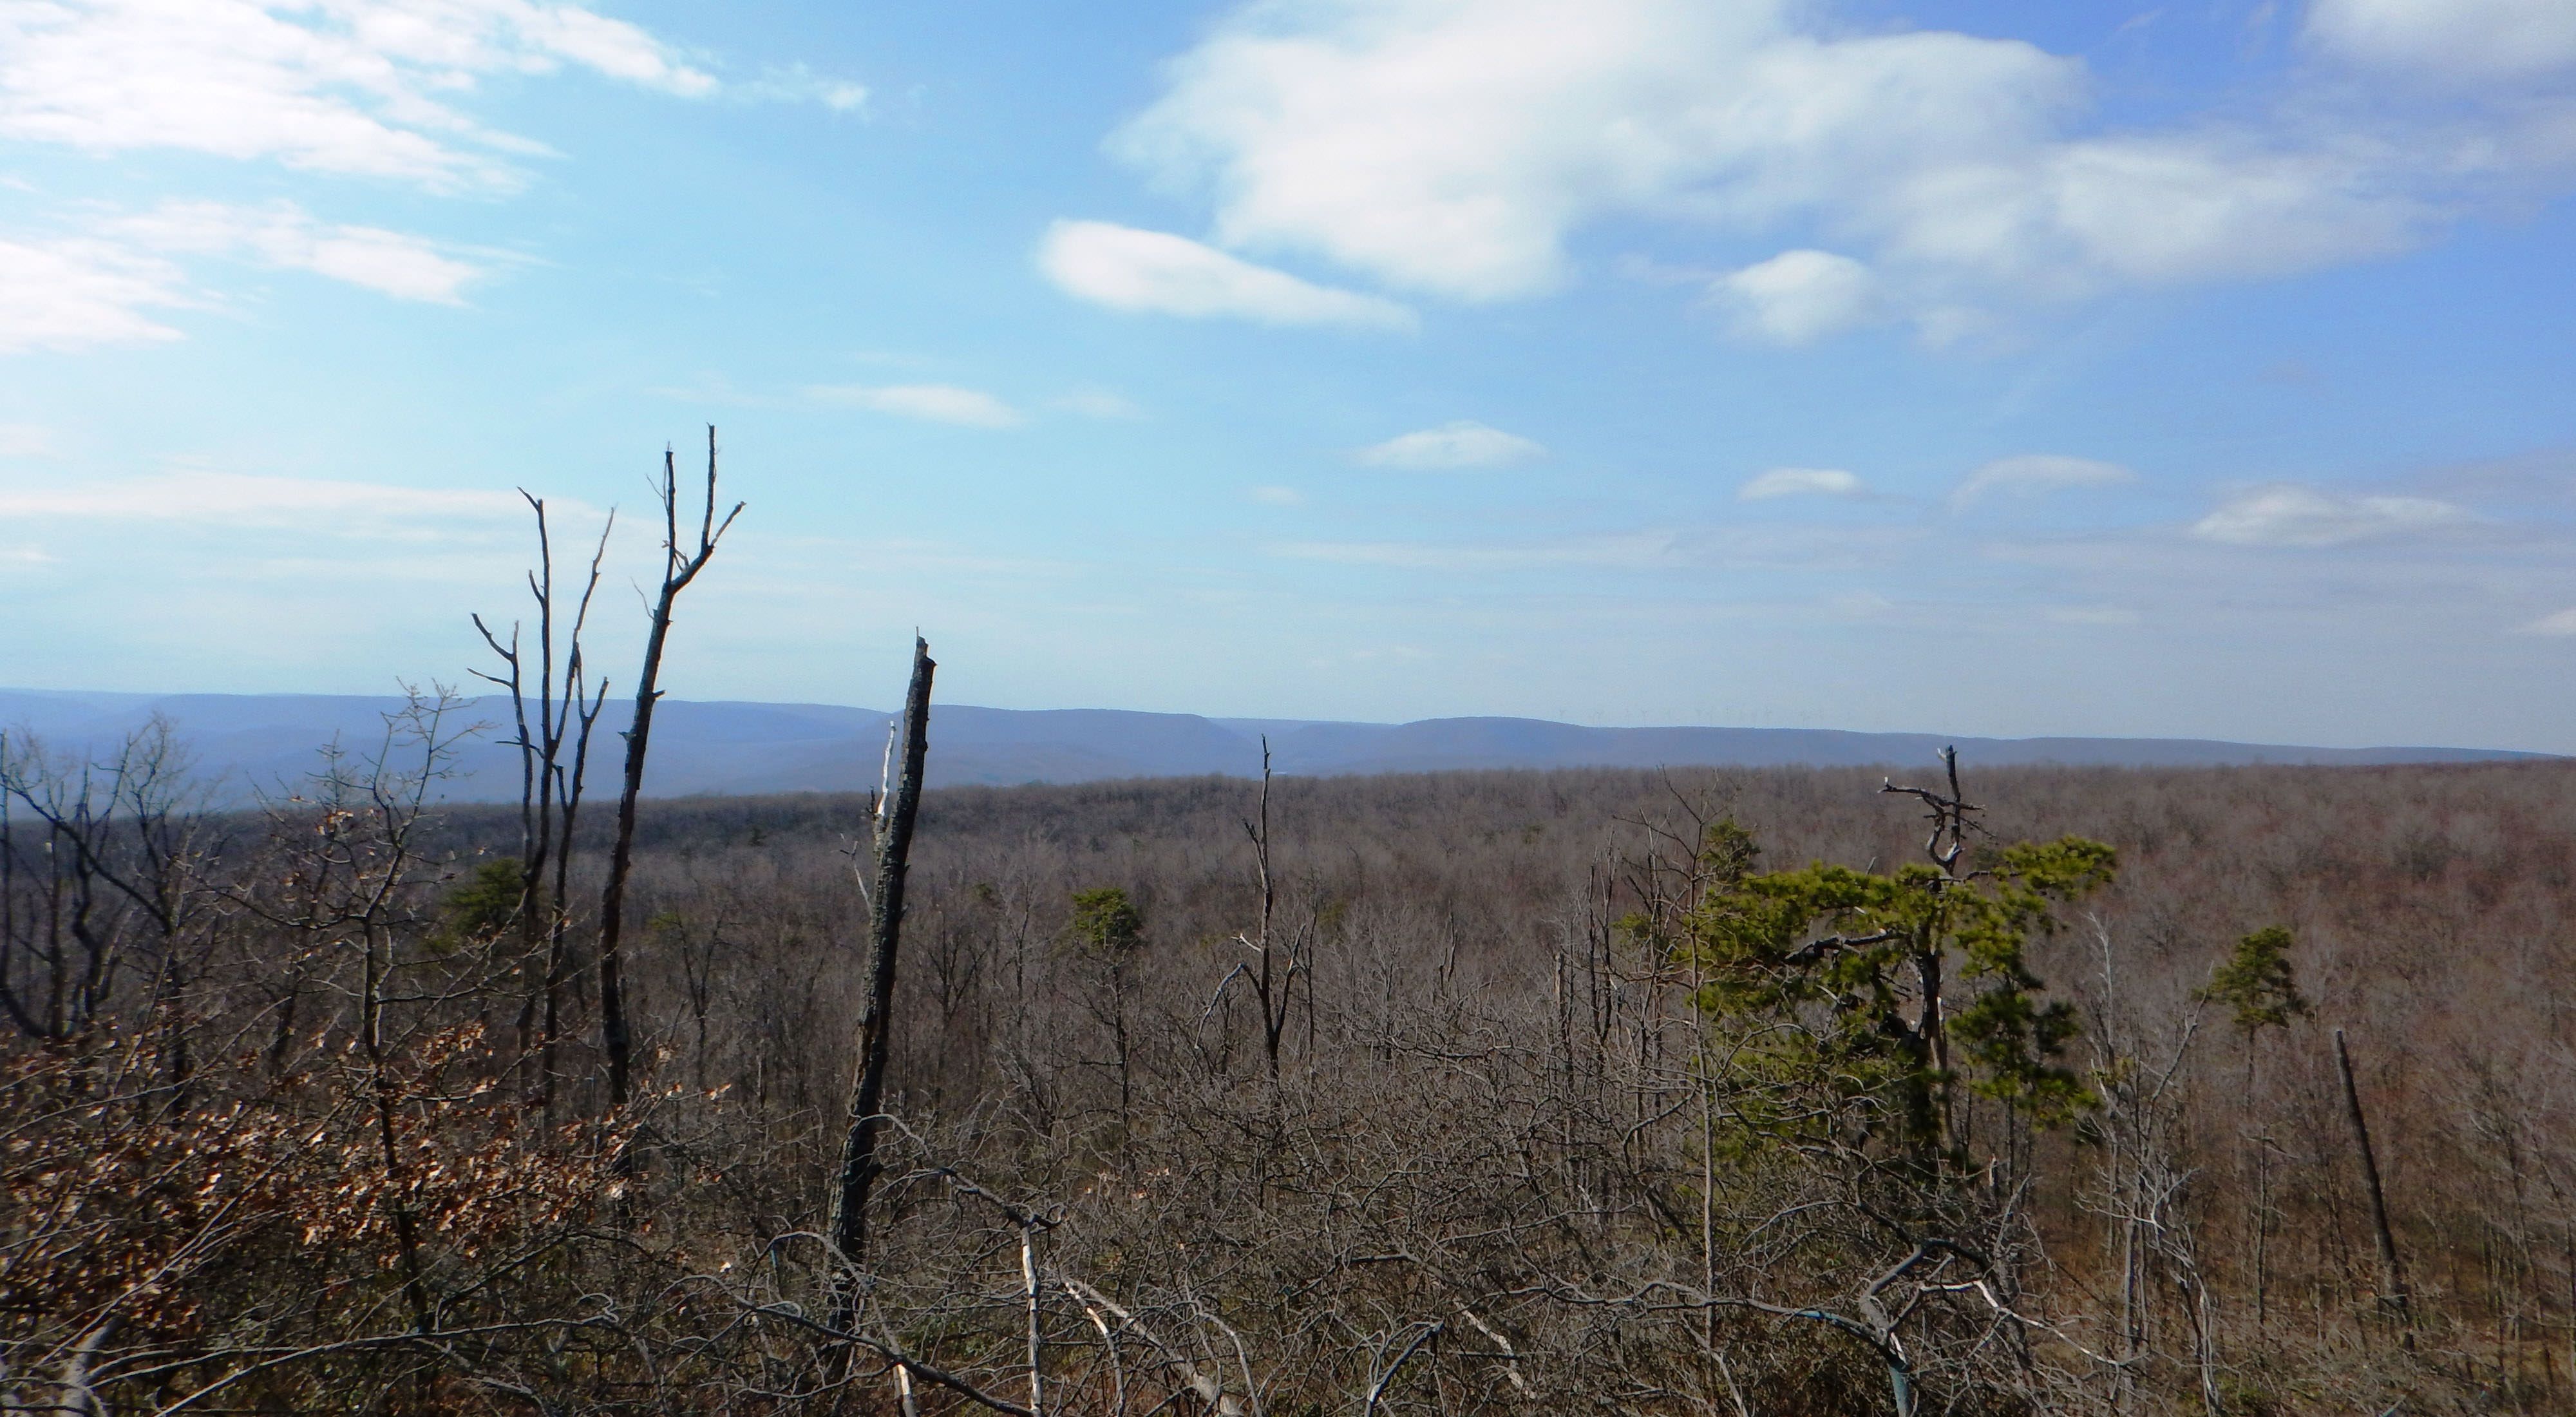 The bare tops of leafless trees in the foreground of a view that looks out over the top of a mountain to another mountain ridge in the far distance along the horizon.